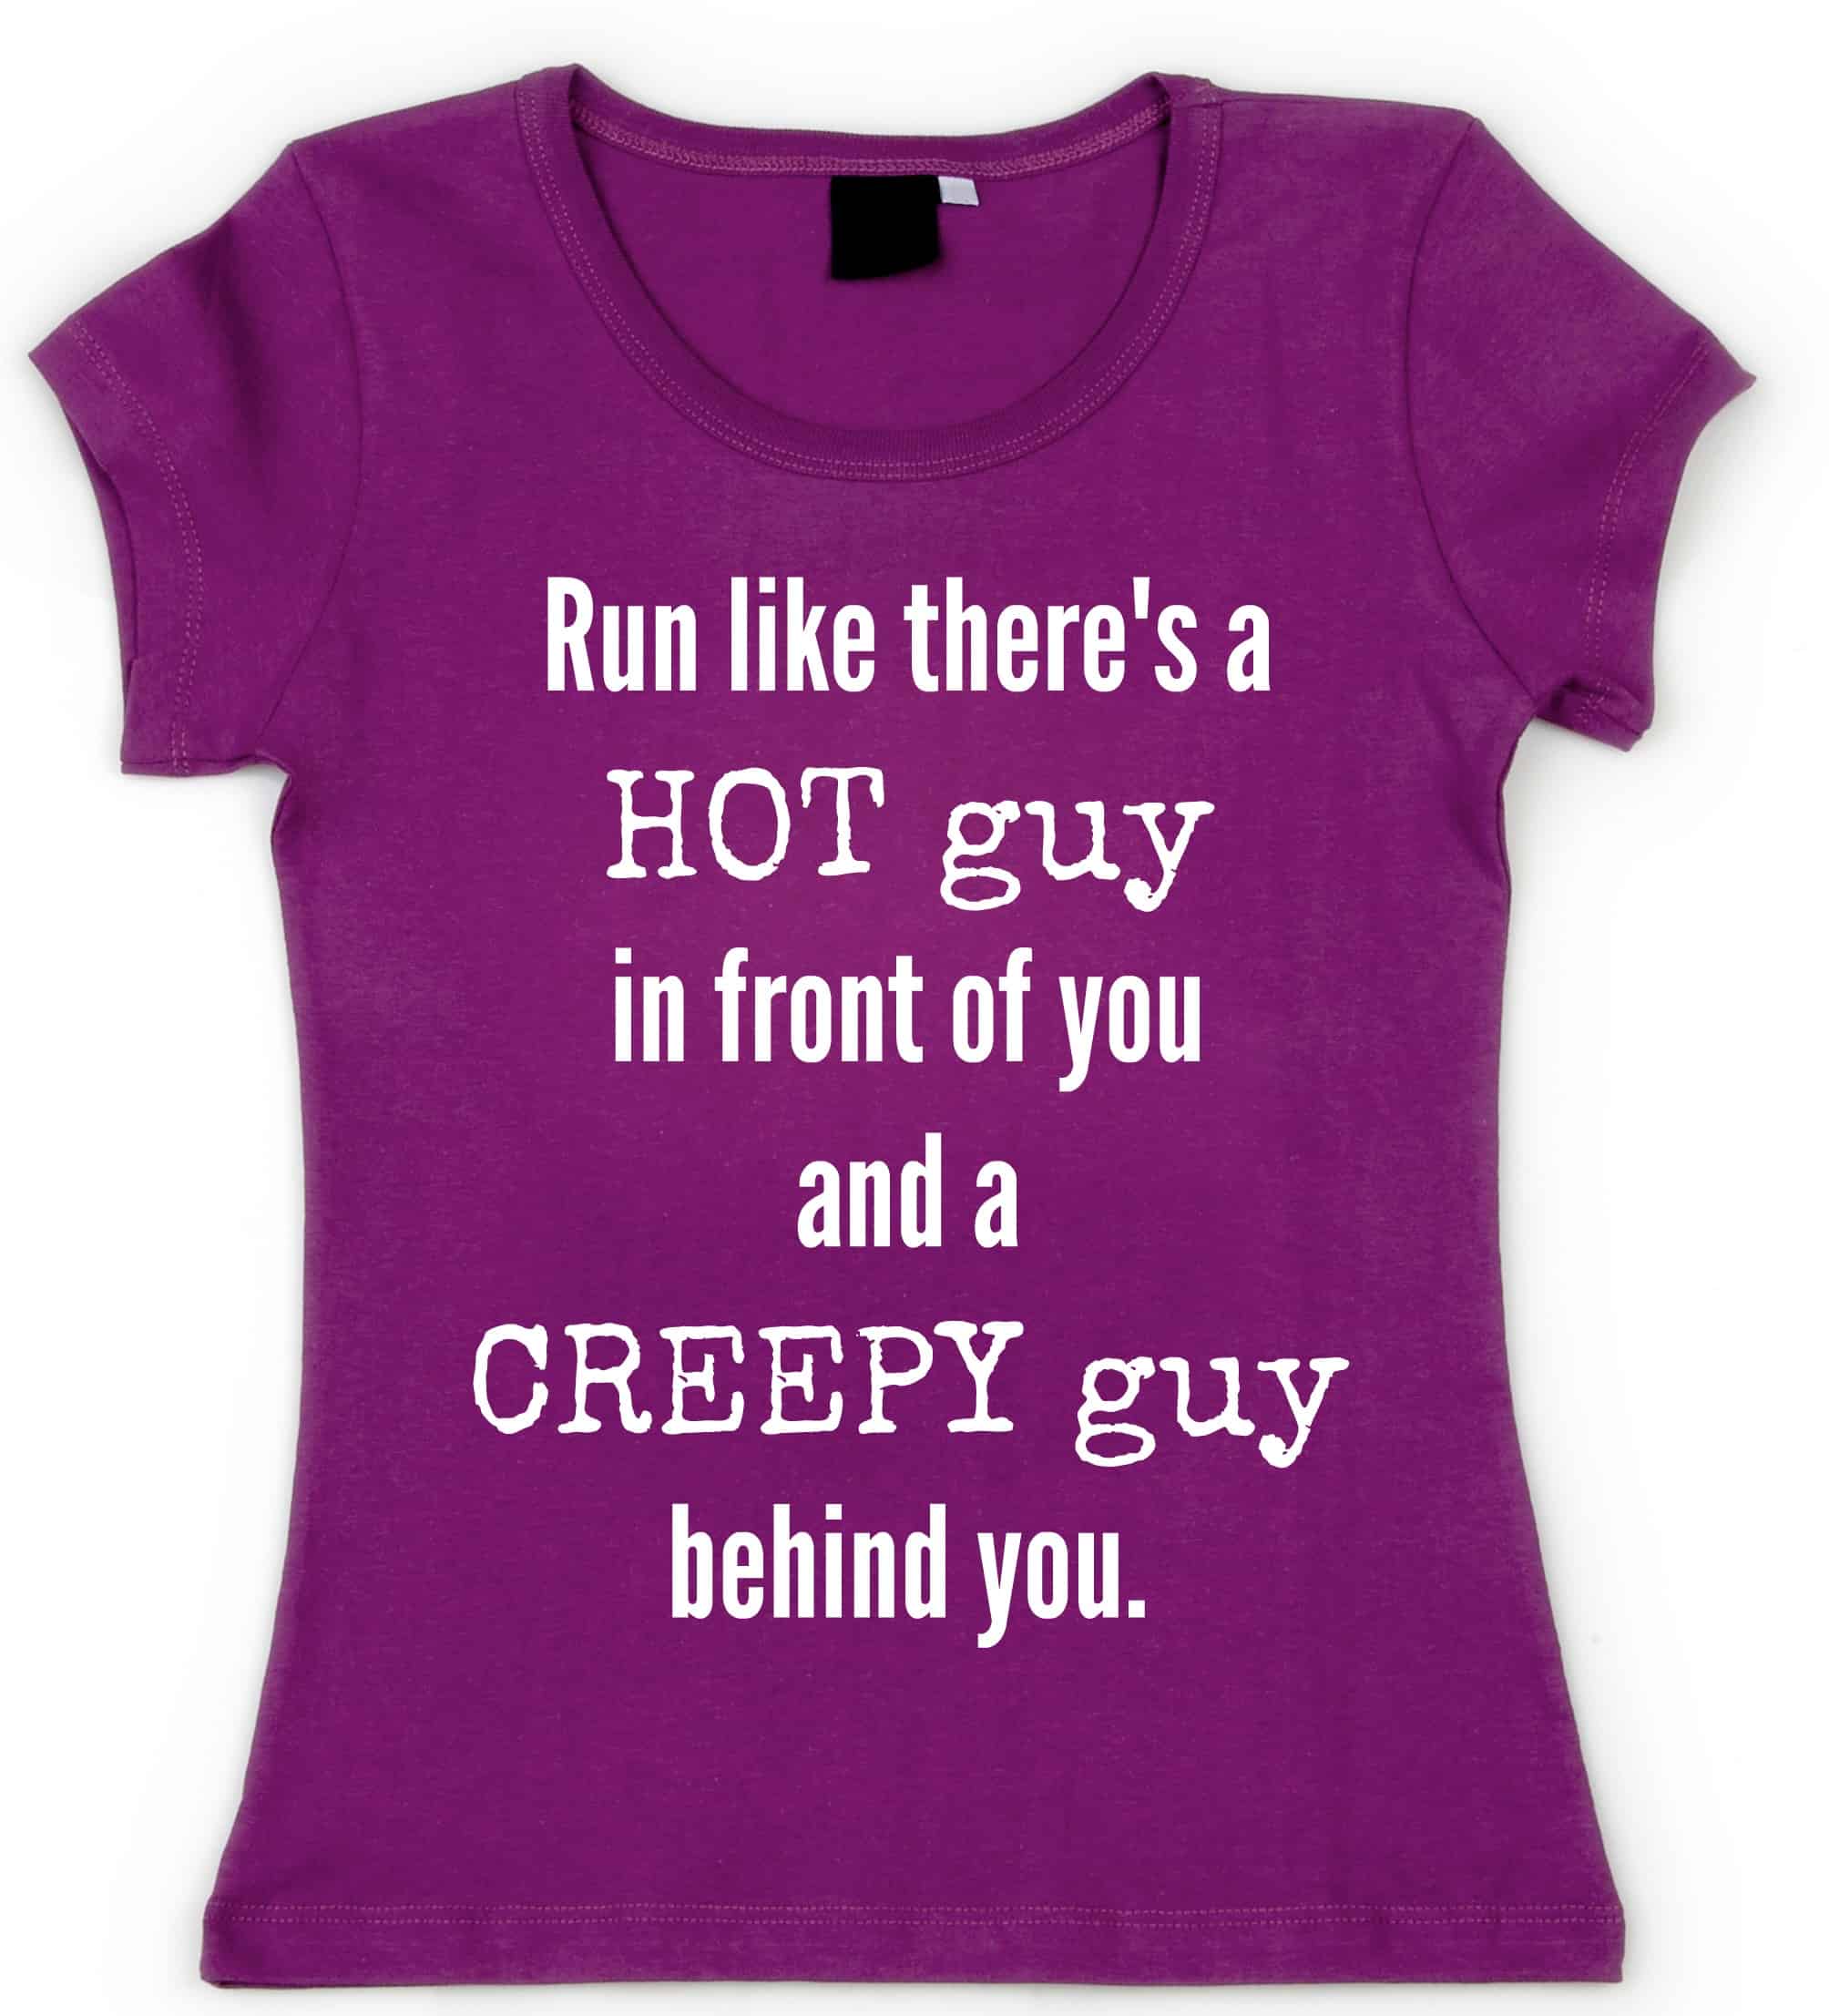 22 of my favorite running slogans, quotes, and t-shirt sayings - Snacking  in Sneakers